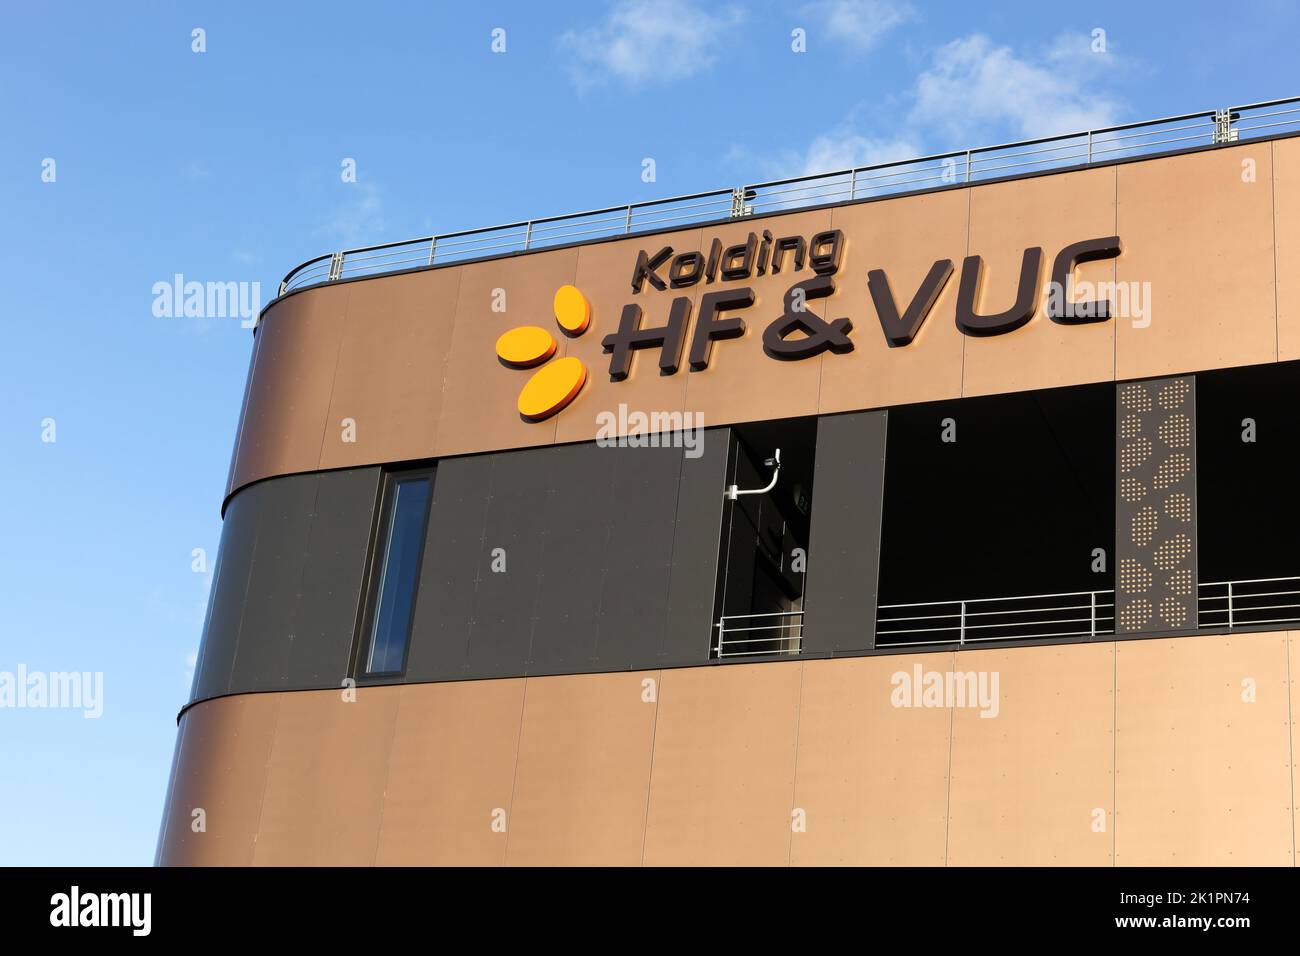 Kolding, Denmark - February 28, 2016: Kolding HF and VUC is a school that offers an adult educational environment Stock Photo